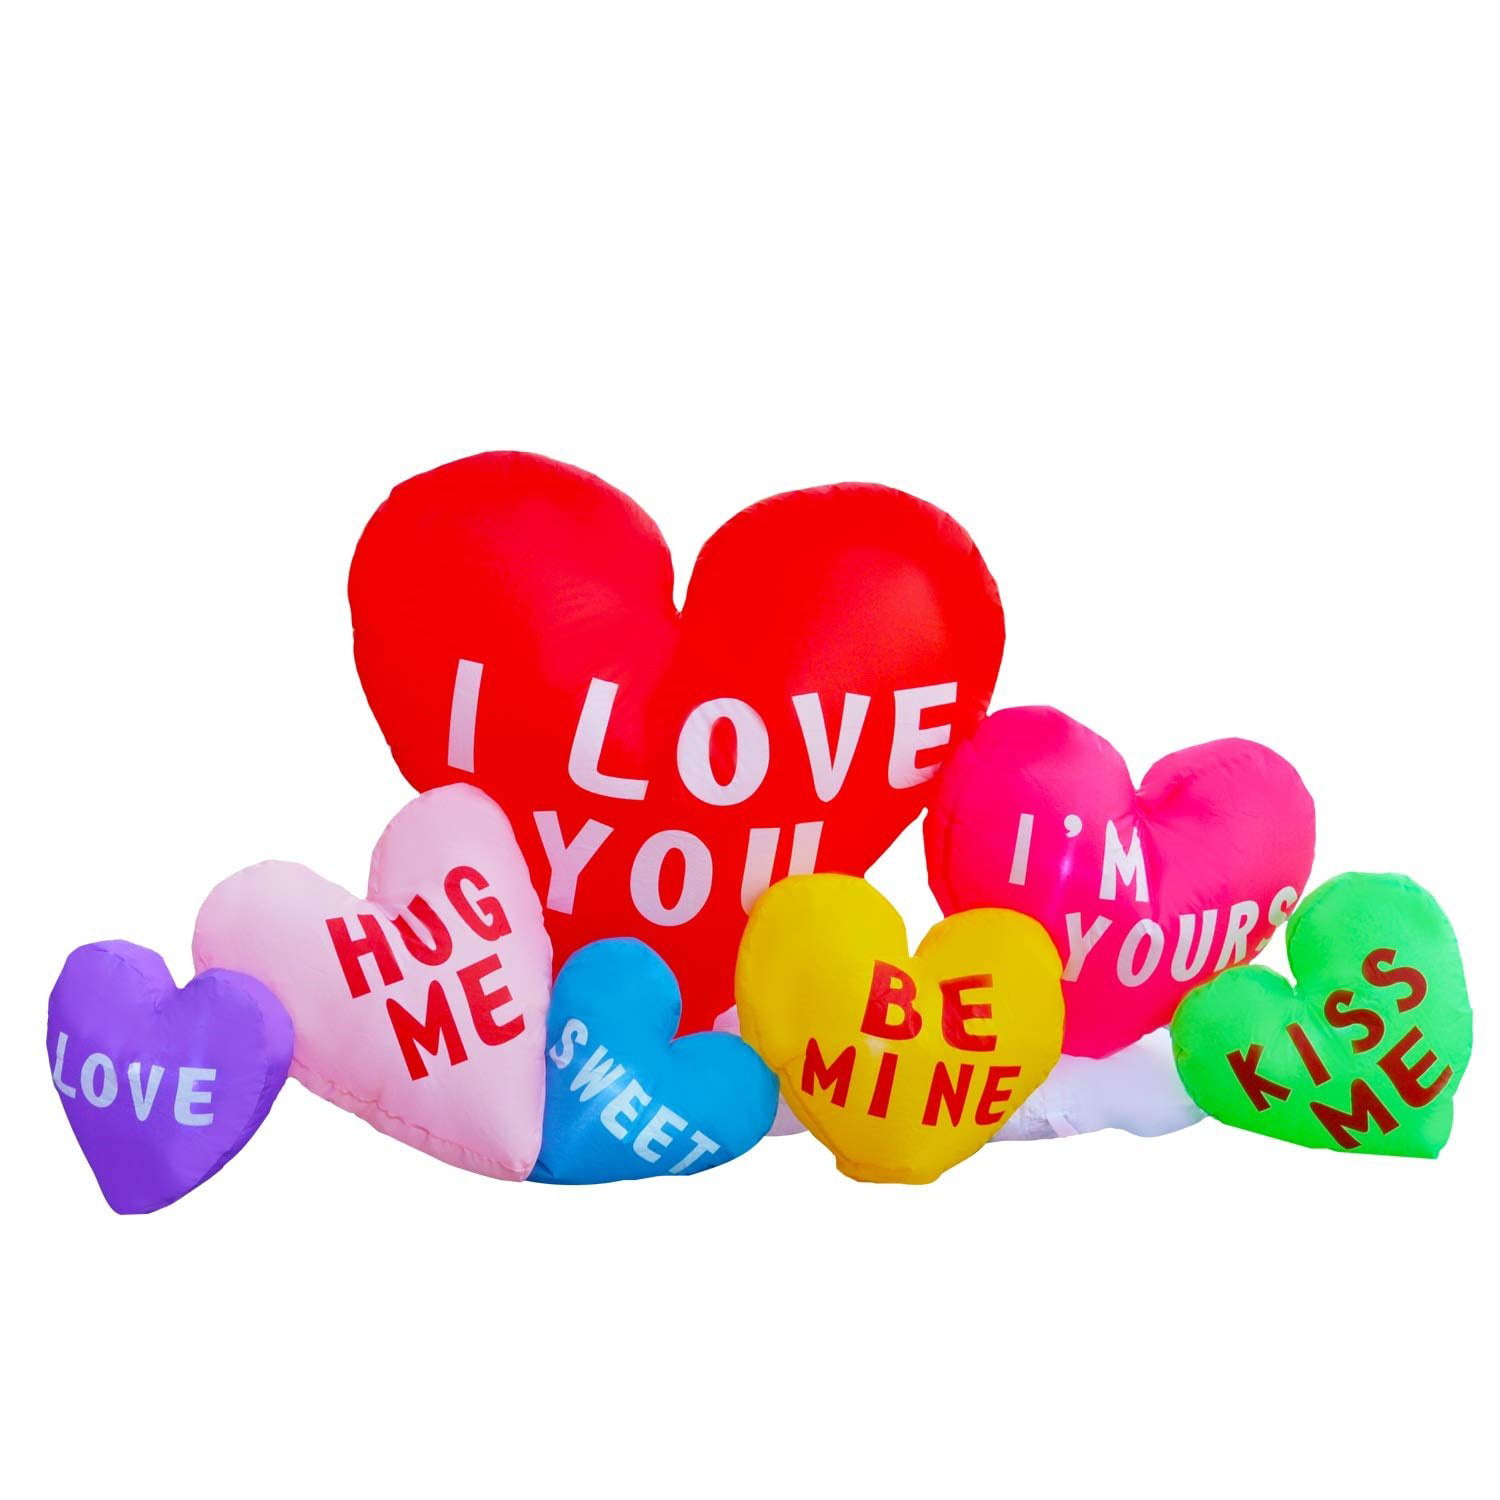 SEASONBLOW 6 Ft Inflatable Valentine Day Sweet Heart Decoration for Wedding Anniversary Party Indoor Outdoor